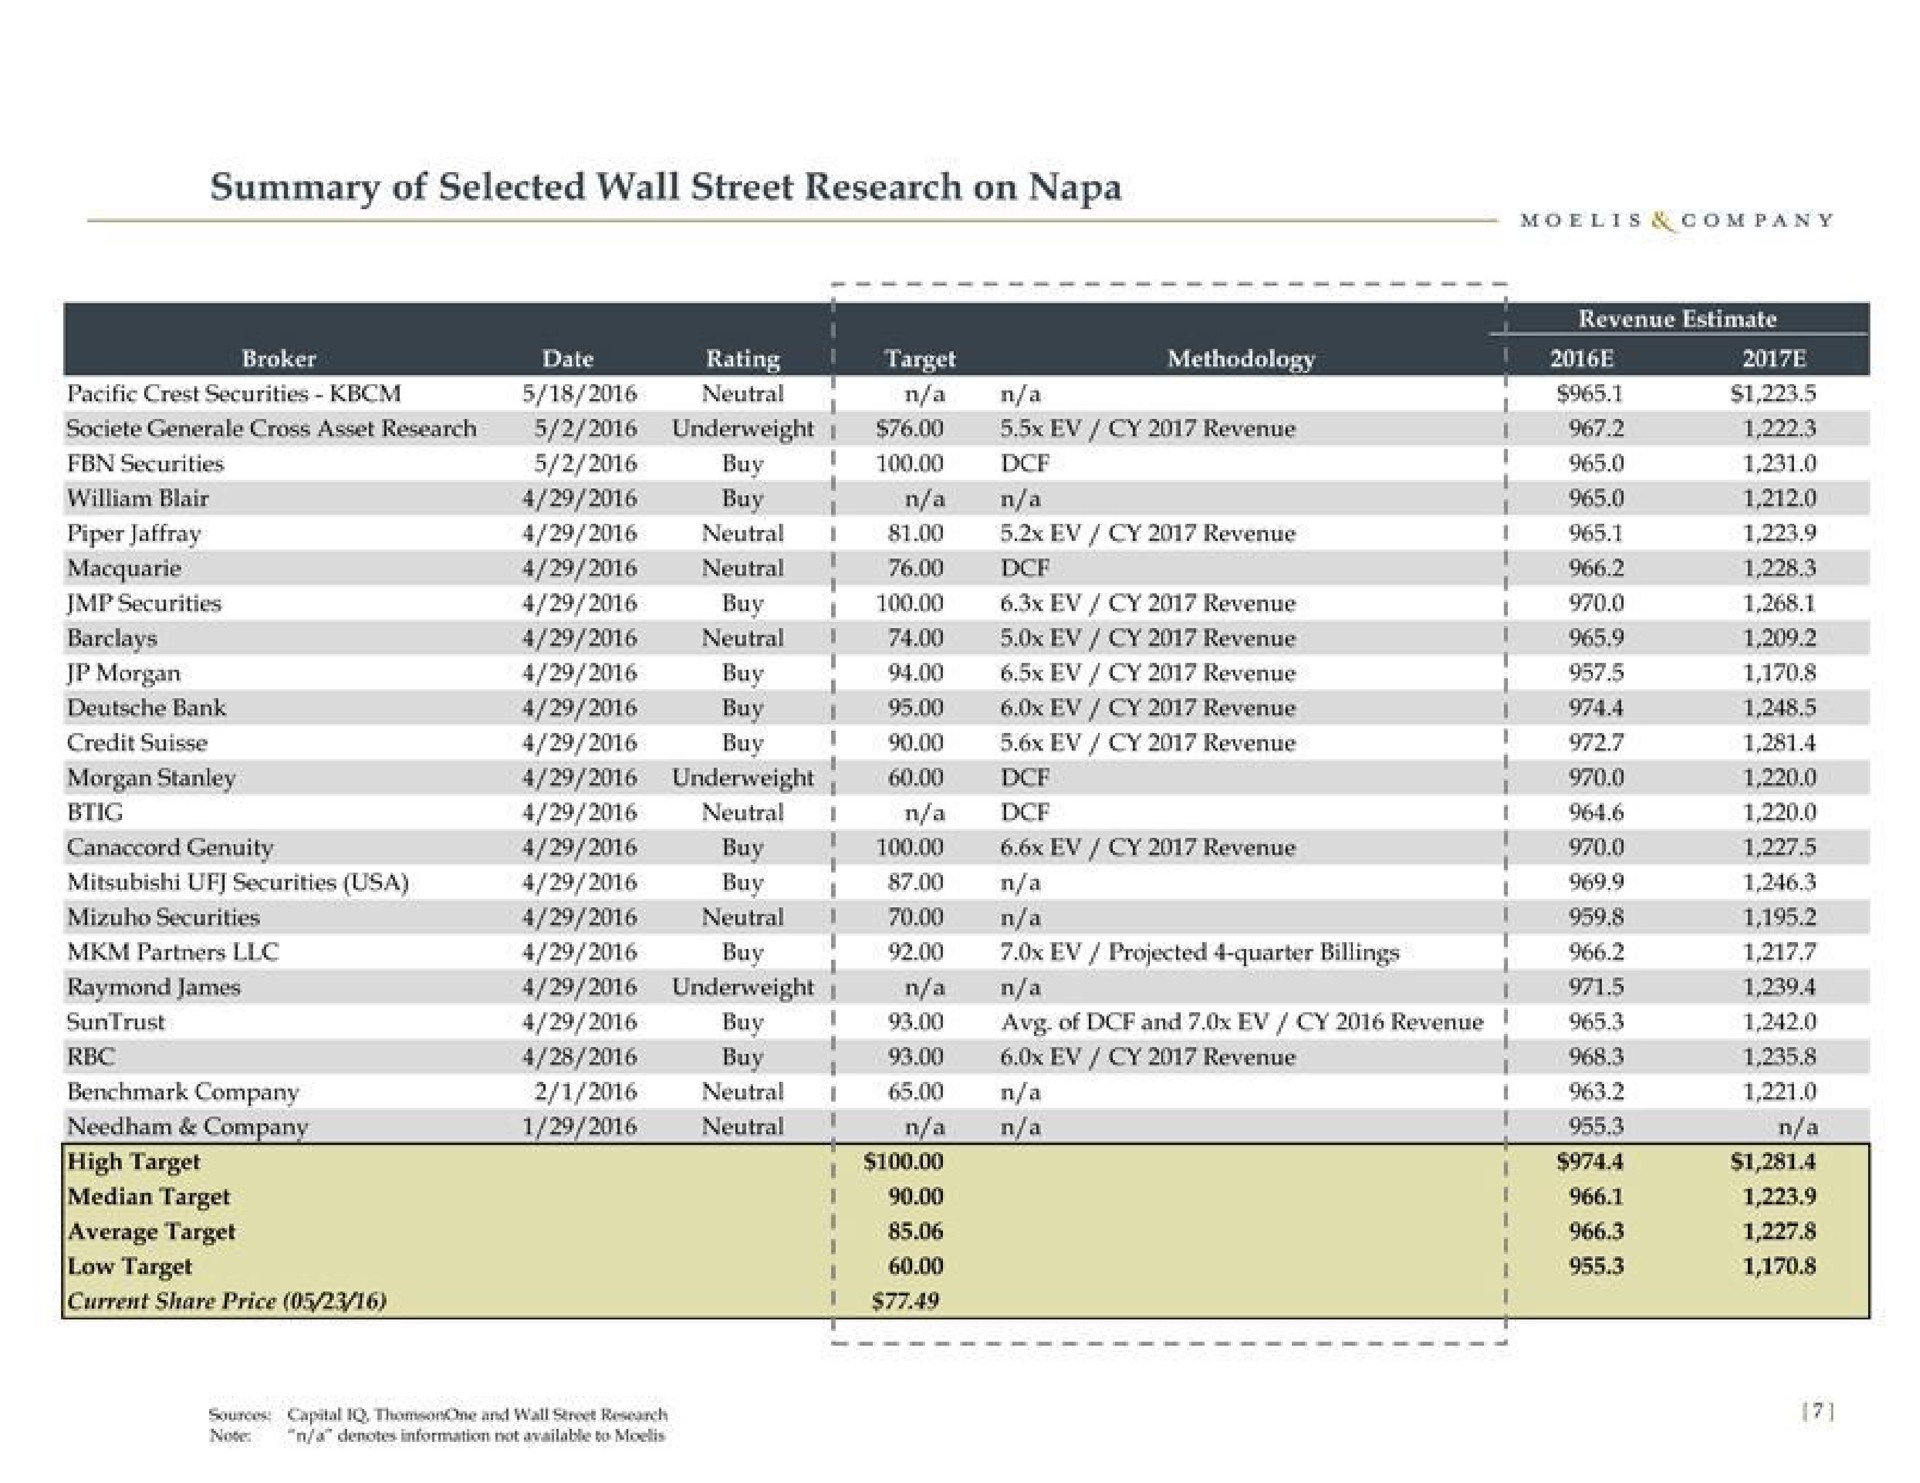 summary of selected wall street research on napa morgan underweight buy revenue | Moelis & Company